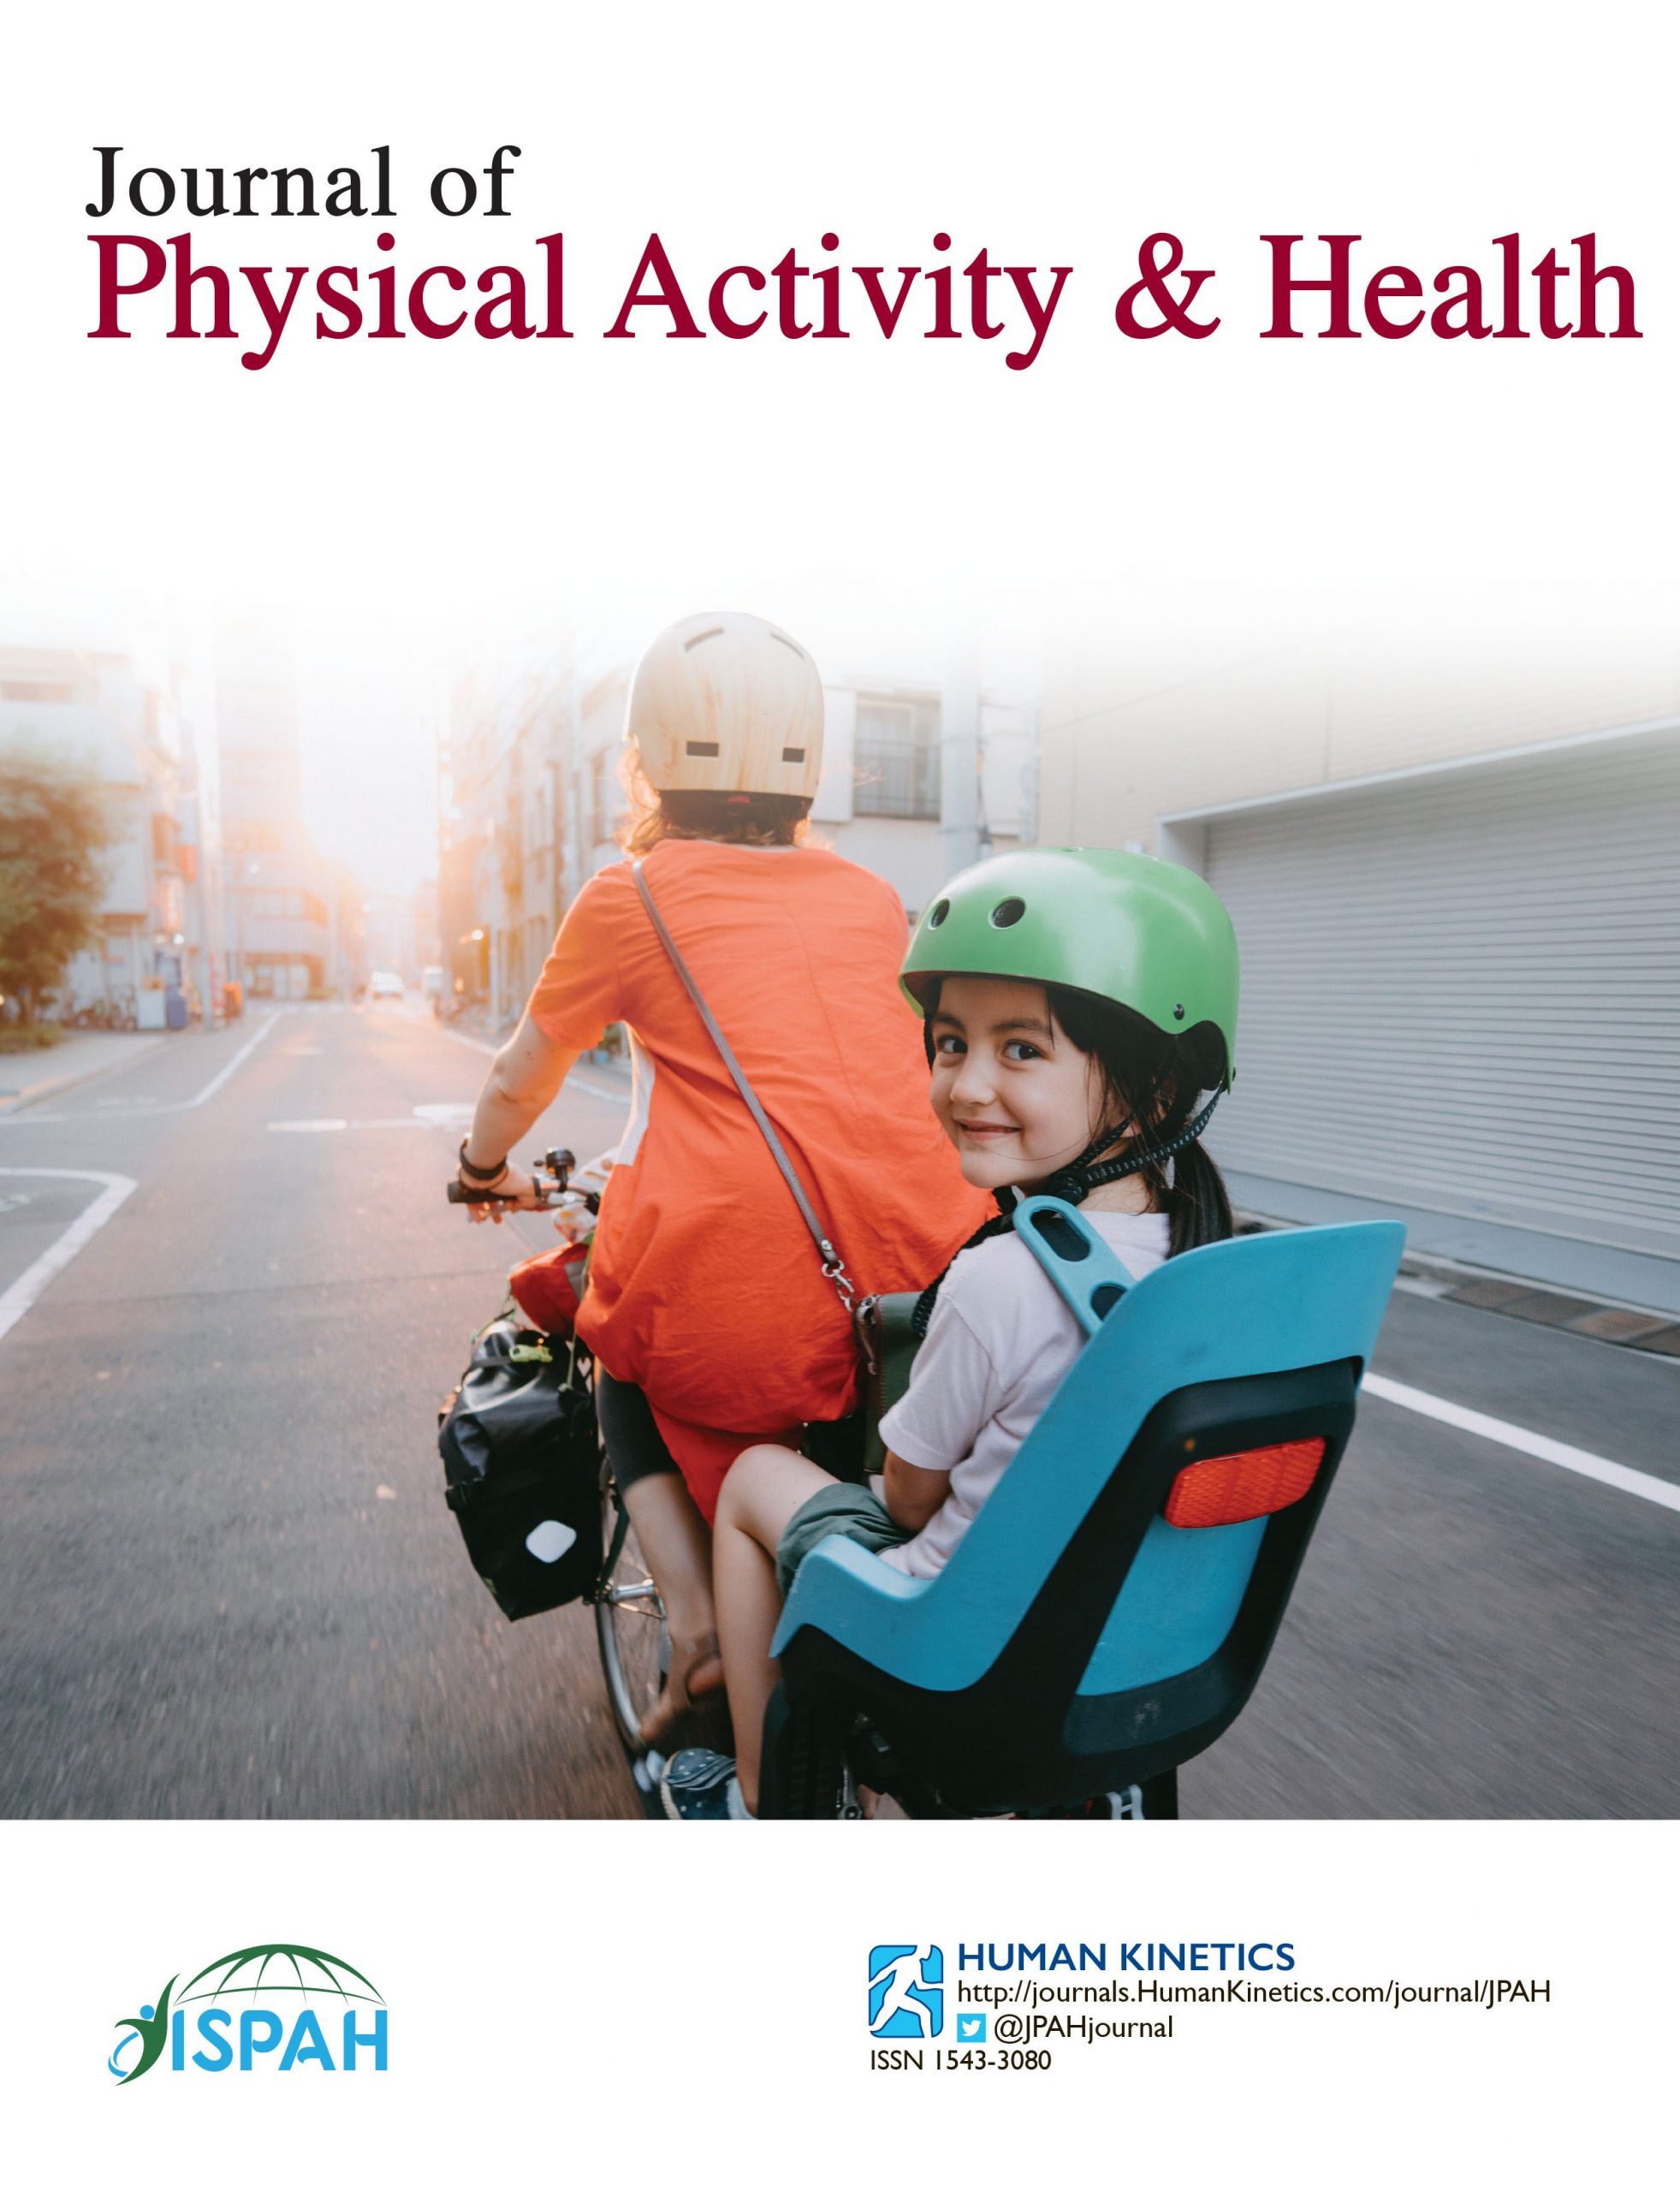 Global Matrix 4.0 Physical Activity Report Card Grades for Children and Adolescents: Results and Analyses From 57 Countries